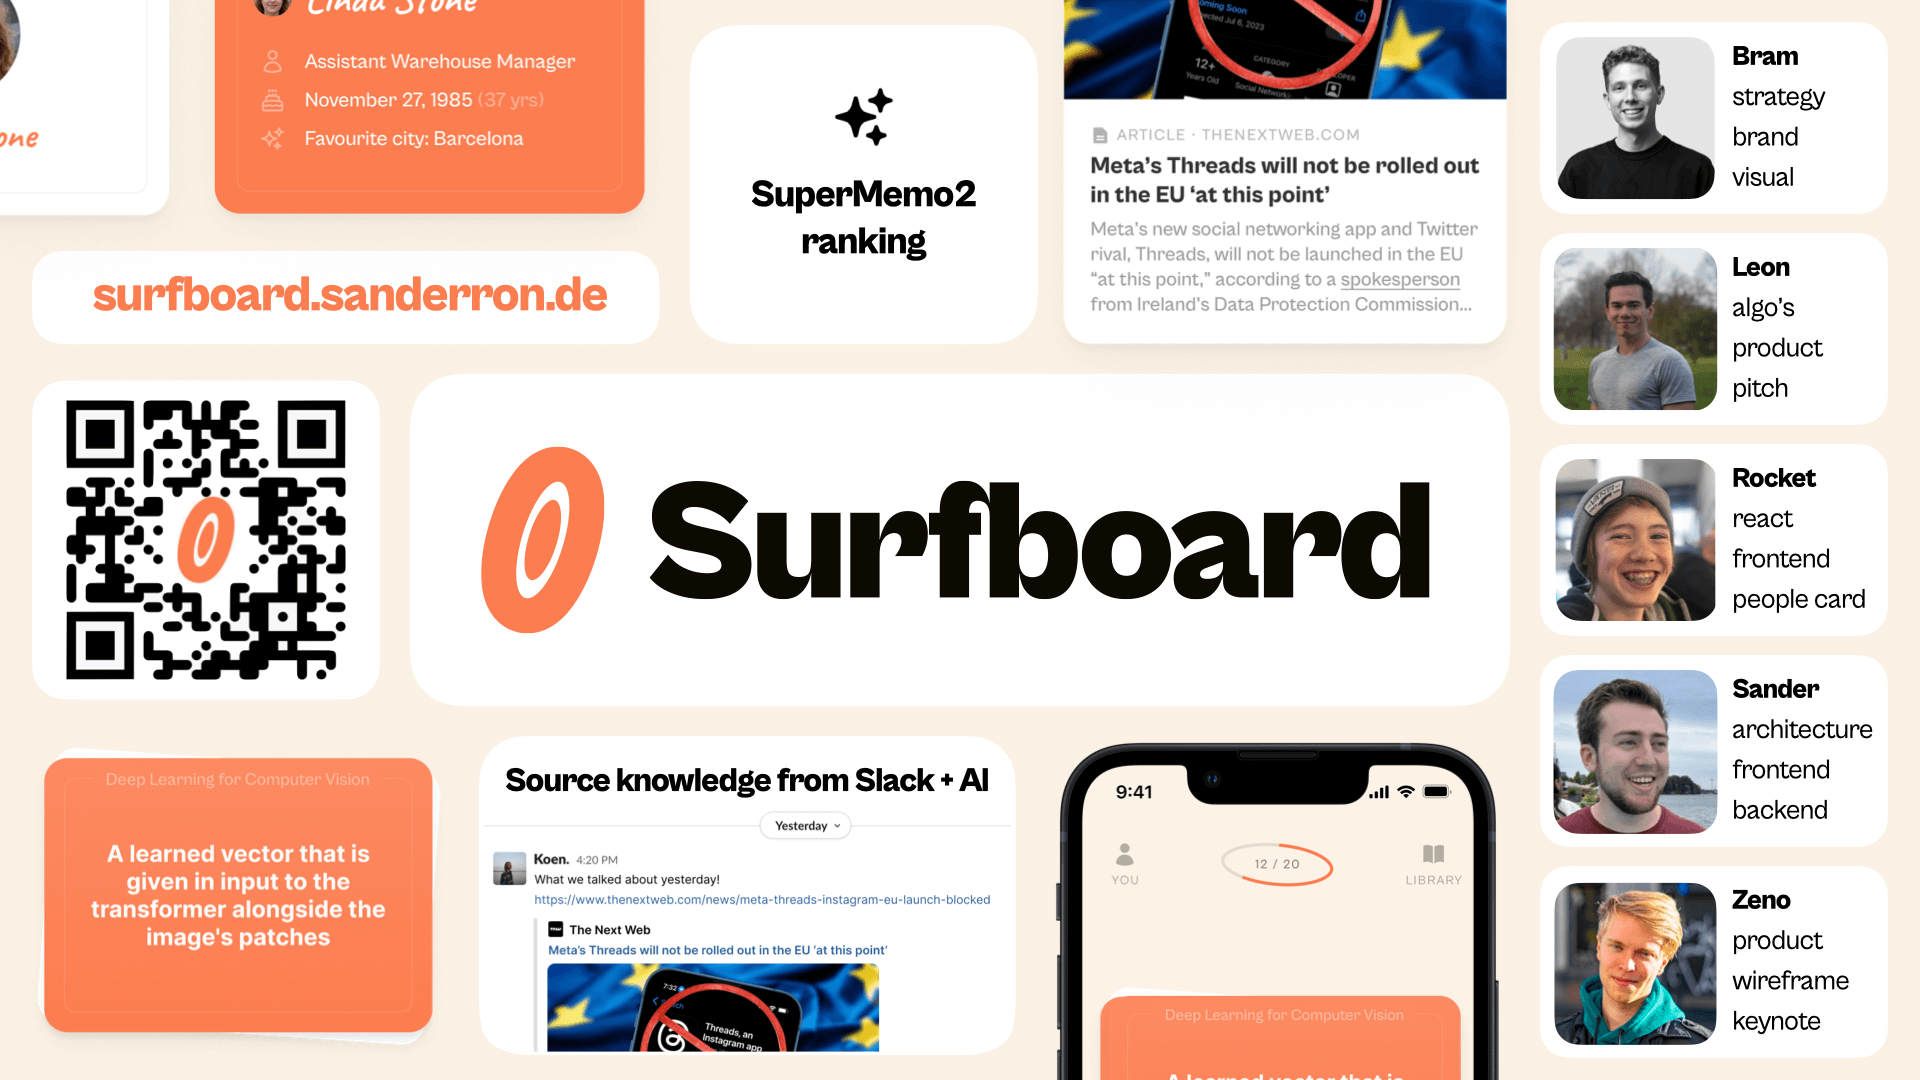 The overview slide for Surfboard: in the middle, the Surfboard logo (an orange overal in the middle of a white oval) is shown next to the Surfboard word mark.